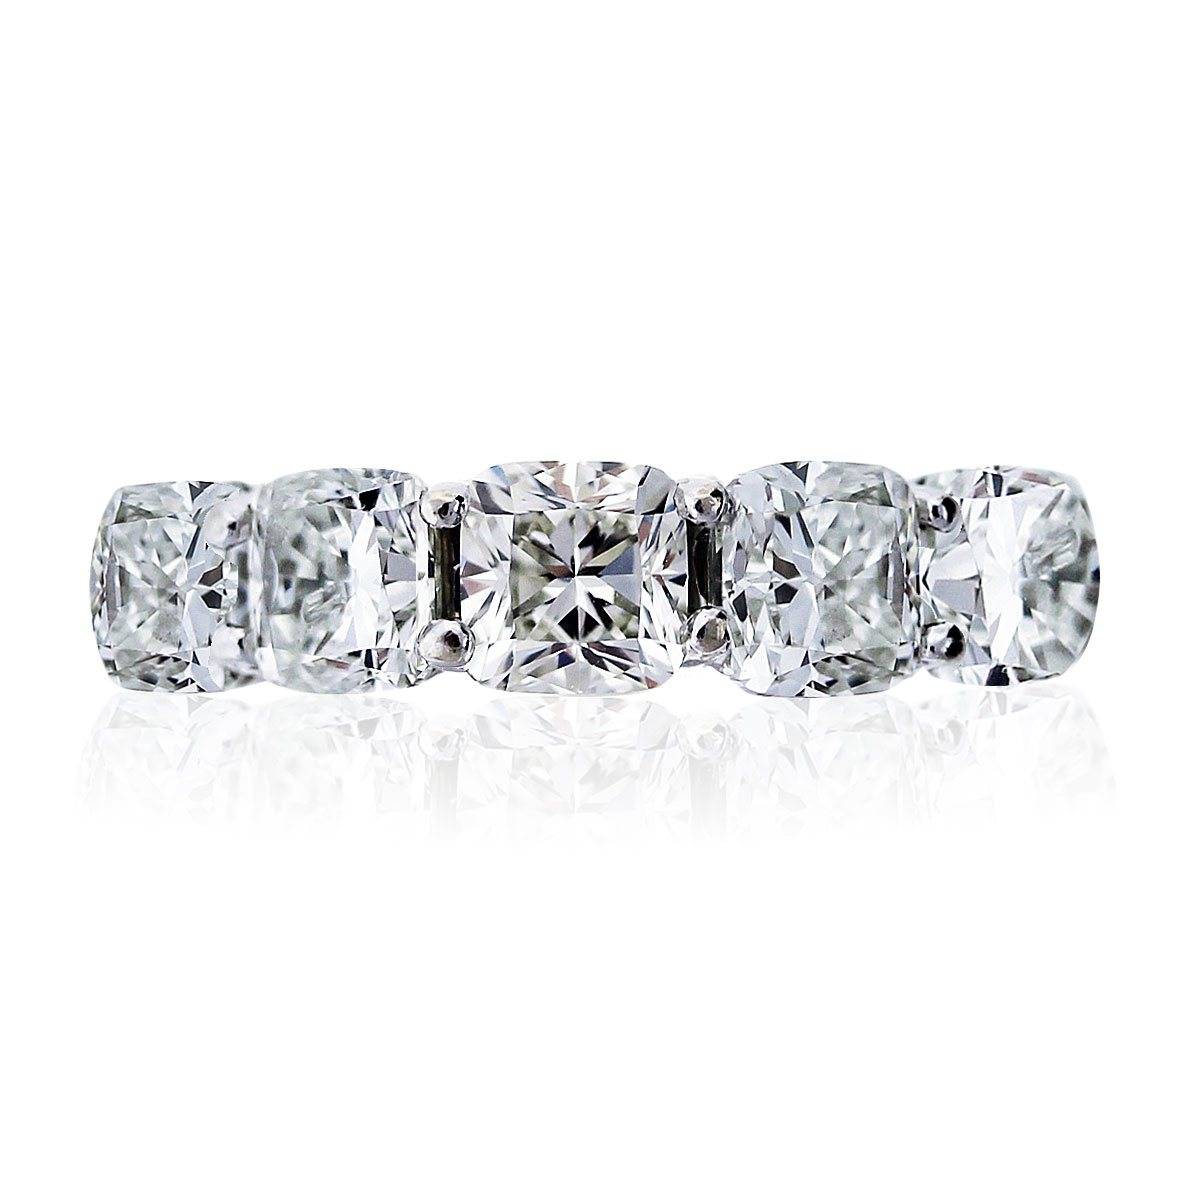 Eternity bands are our most popular wedding band choice, and cushion cut diamonds are in the top 2 of diamond shapes. Put them both together and magic happens.